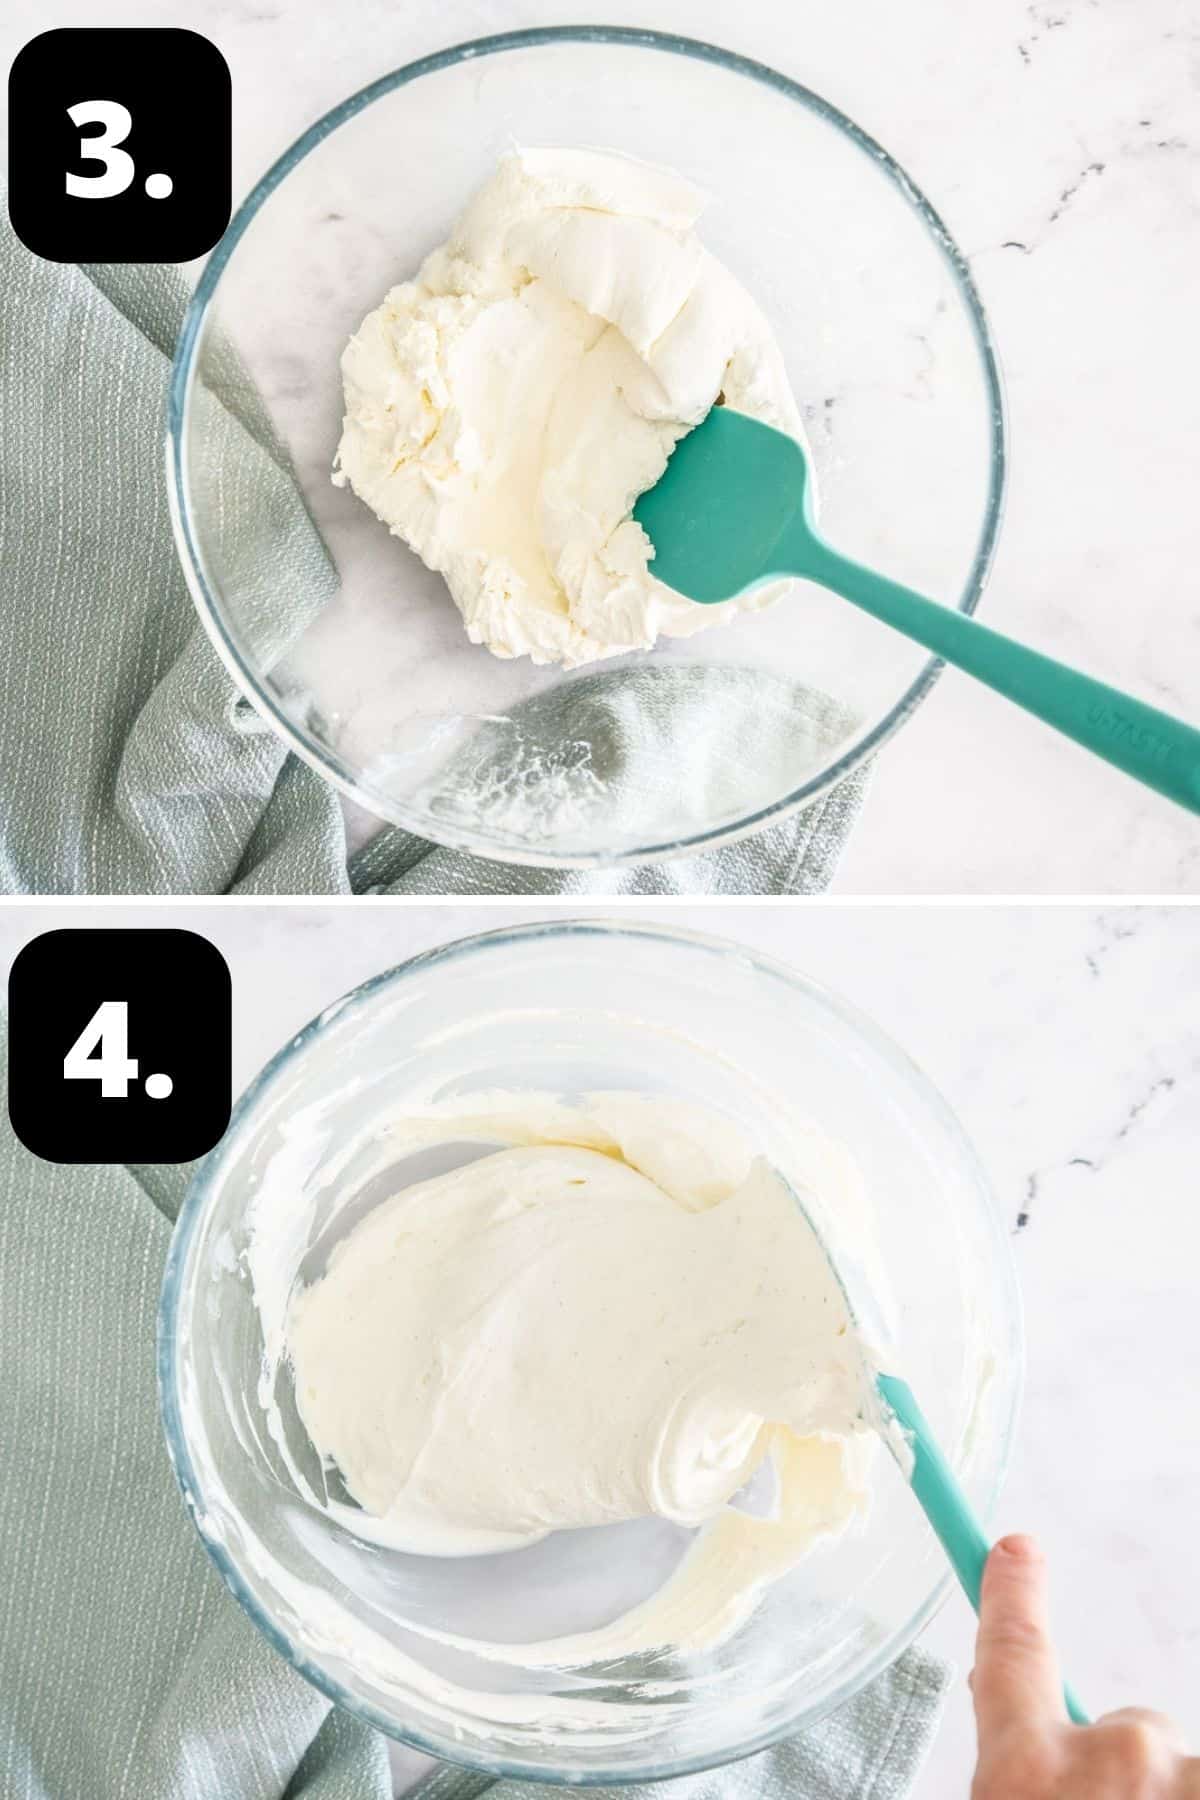 Steps 3-4 of preparing this recipe: the strained yoghurt in a bowl and folding in the whipped cream with the yoghurt.